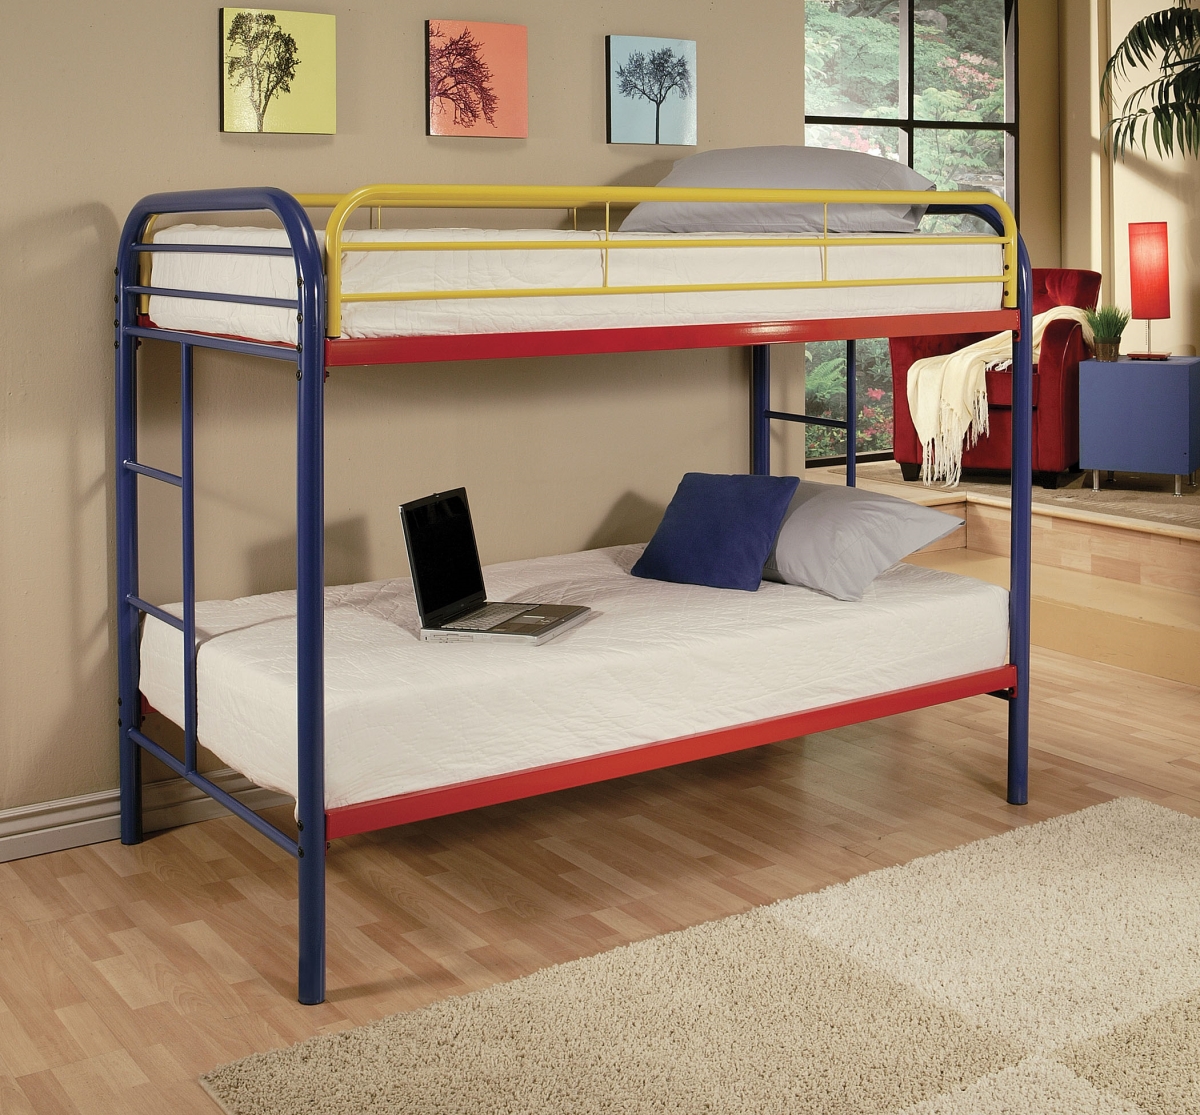 Picture of Home Roots Furniture 285200 60 x 78 x 41 in. Metal Tube Twin Bunk Bed - Rainbow